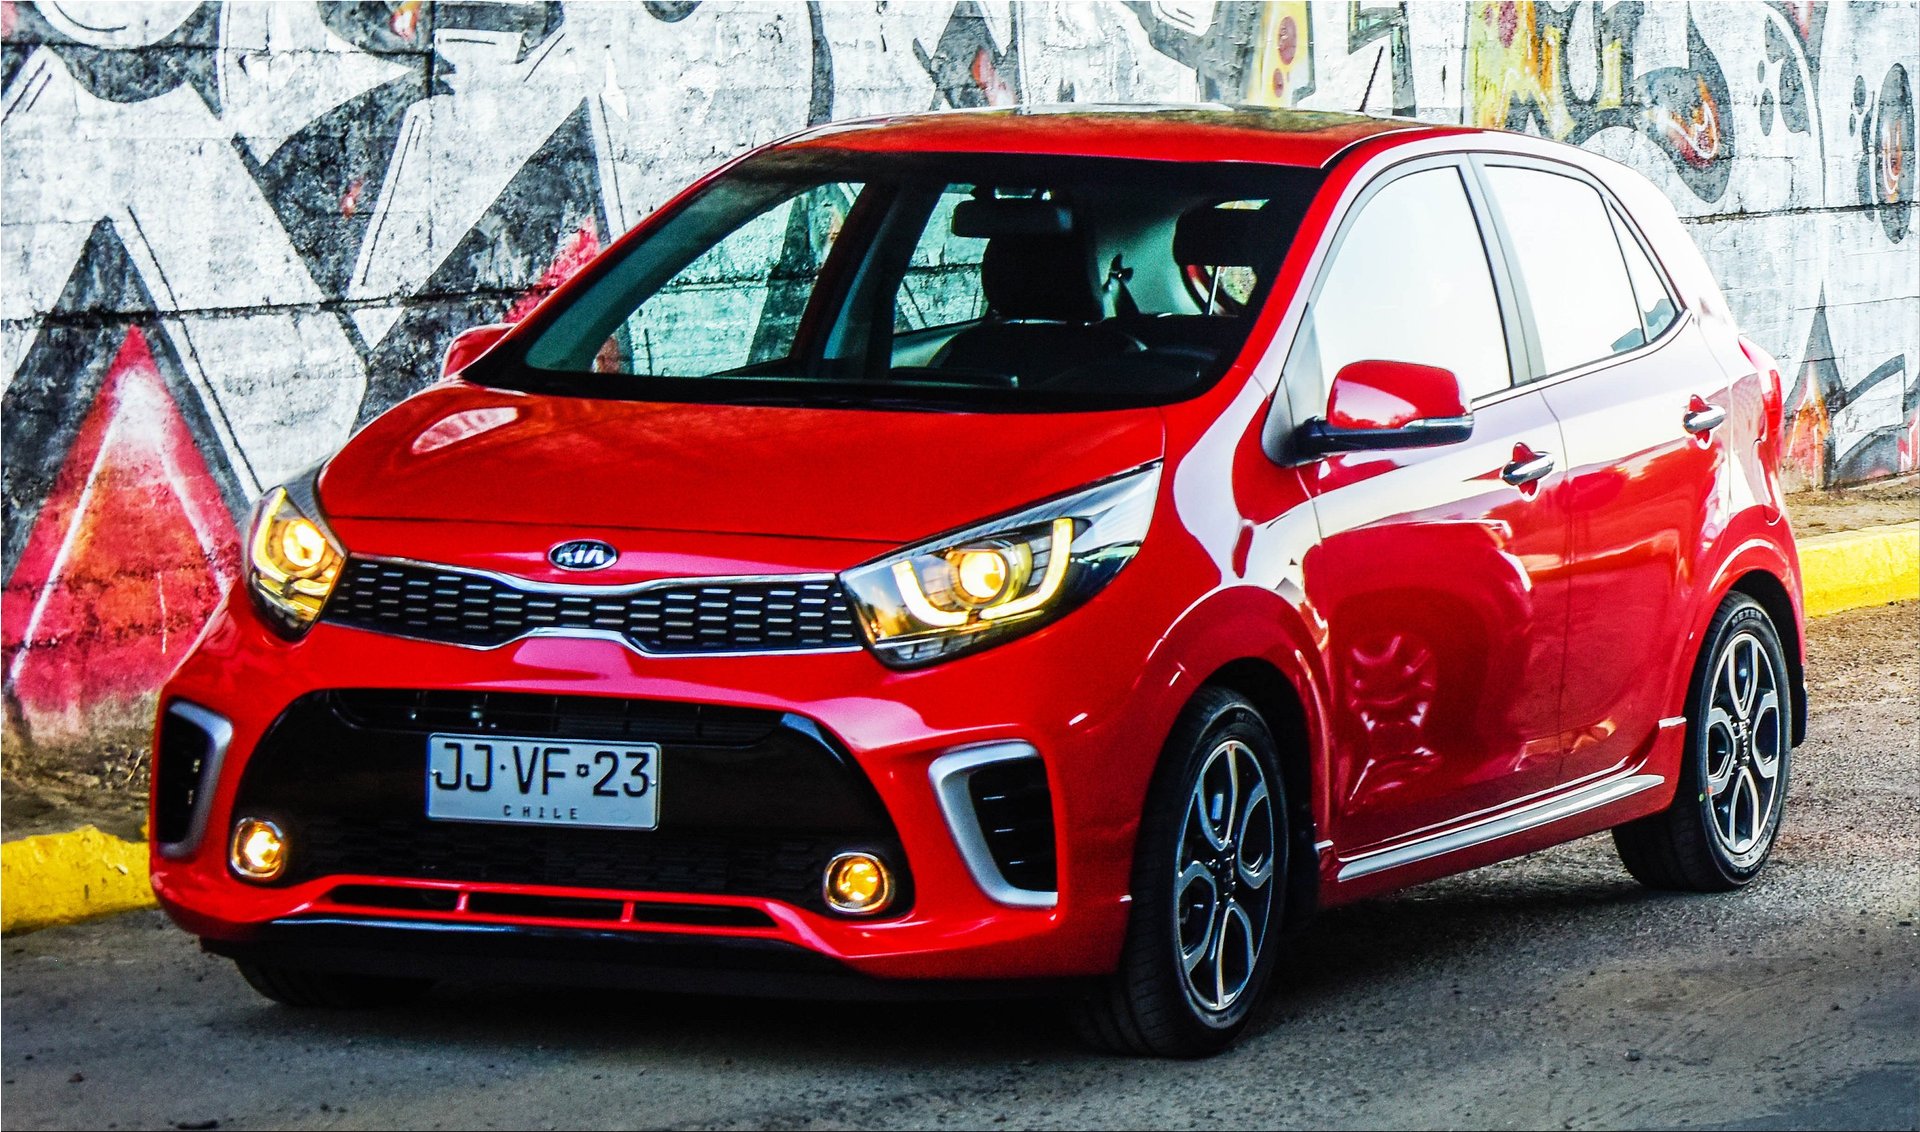 2020 Kia Picanto facelift launched in S. Korea, priced from INR 7.27 lakh